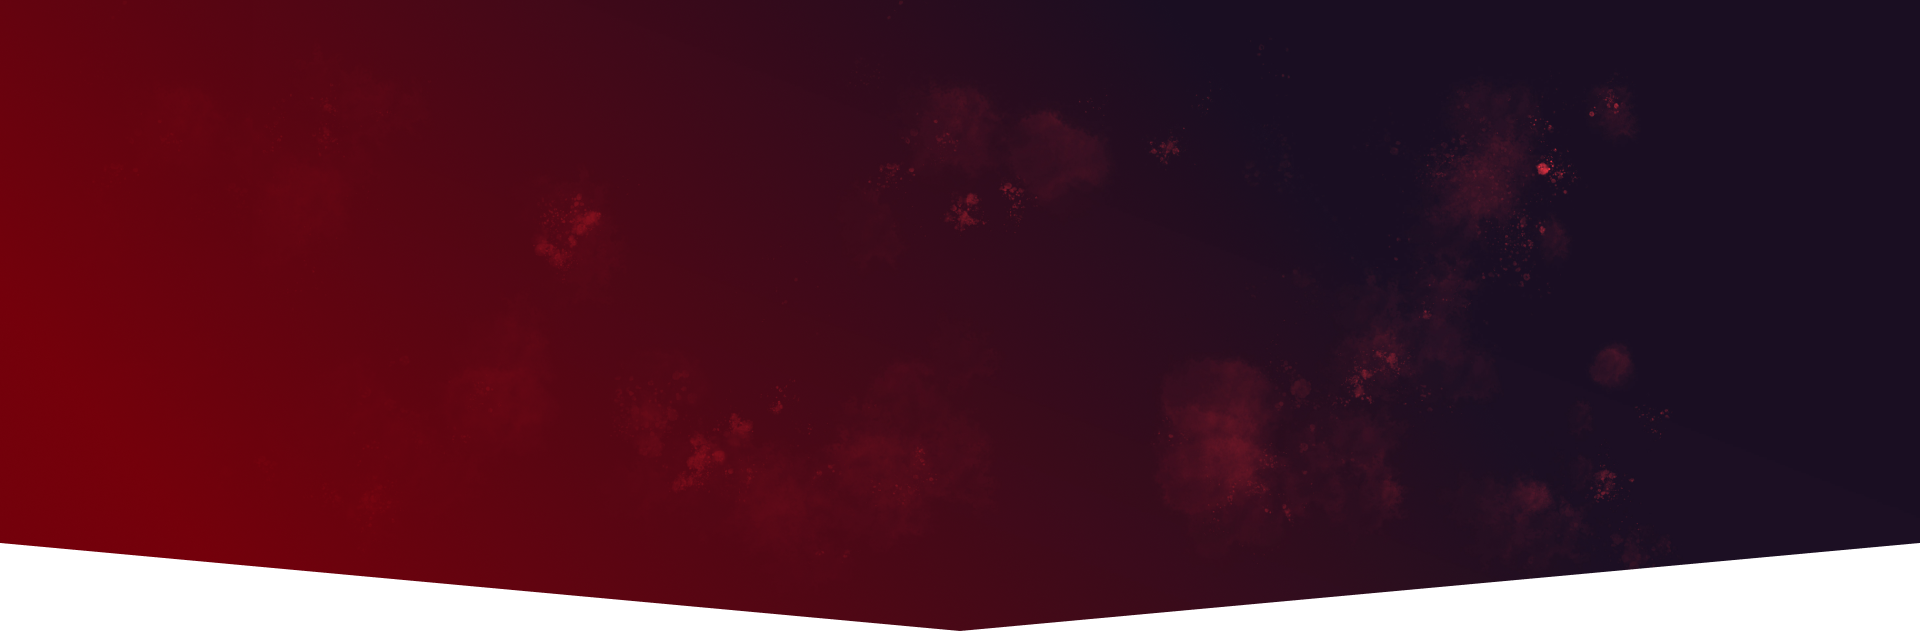 Background image of abstract blood splatter with a dark red color scheme.